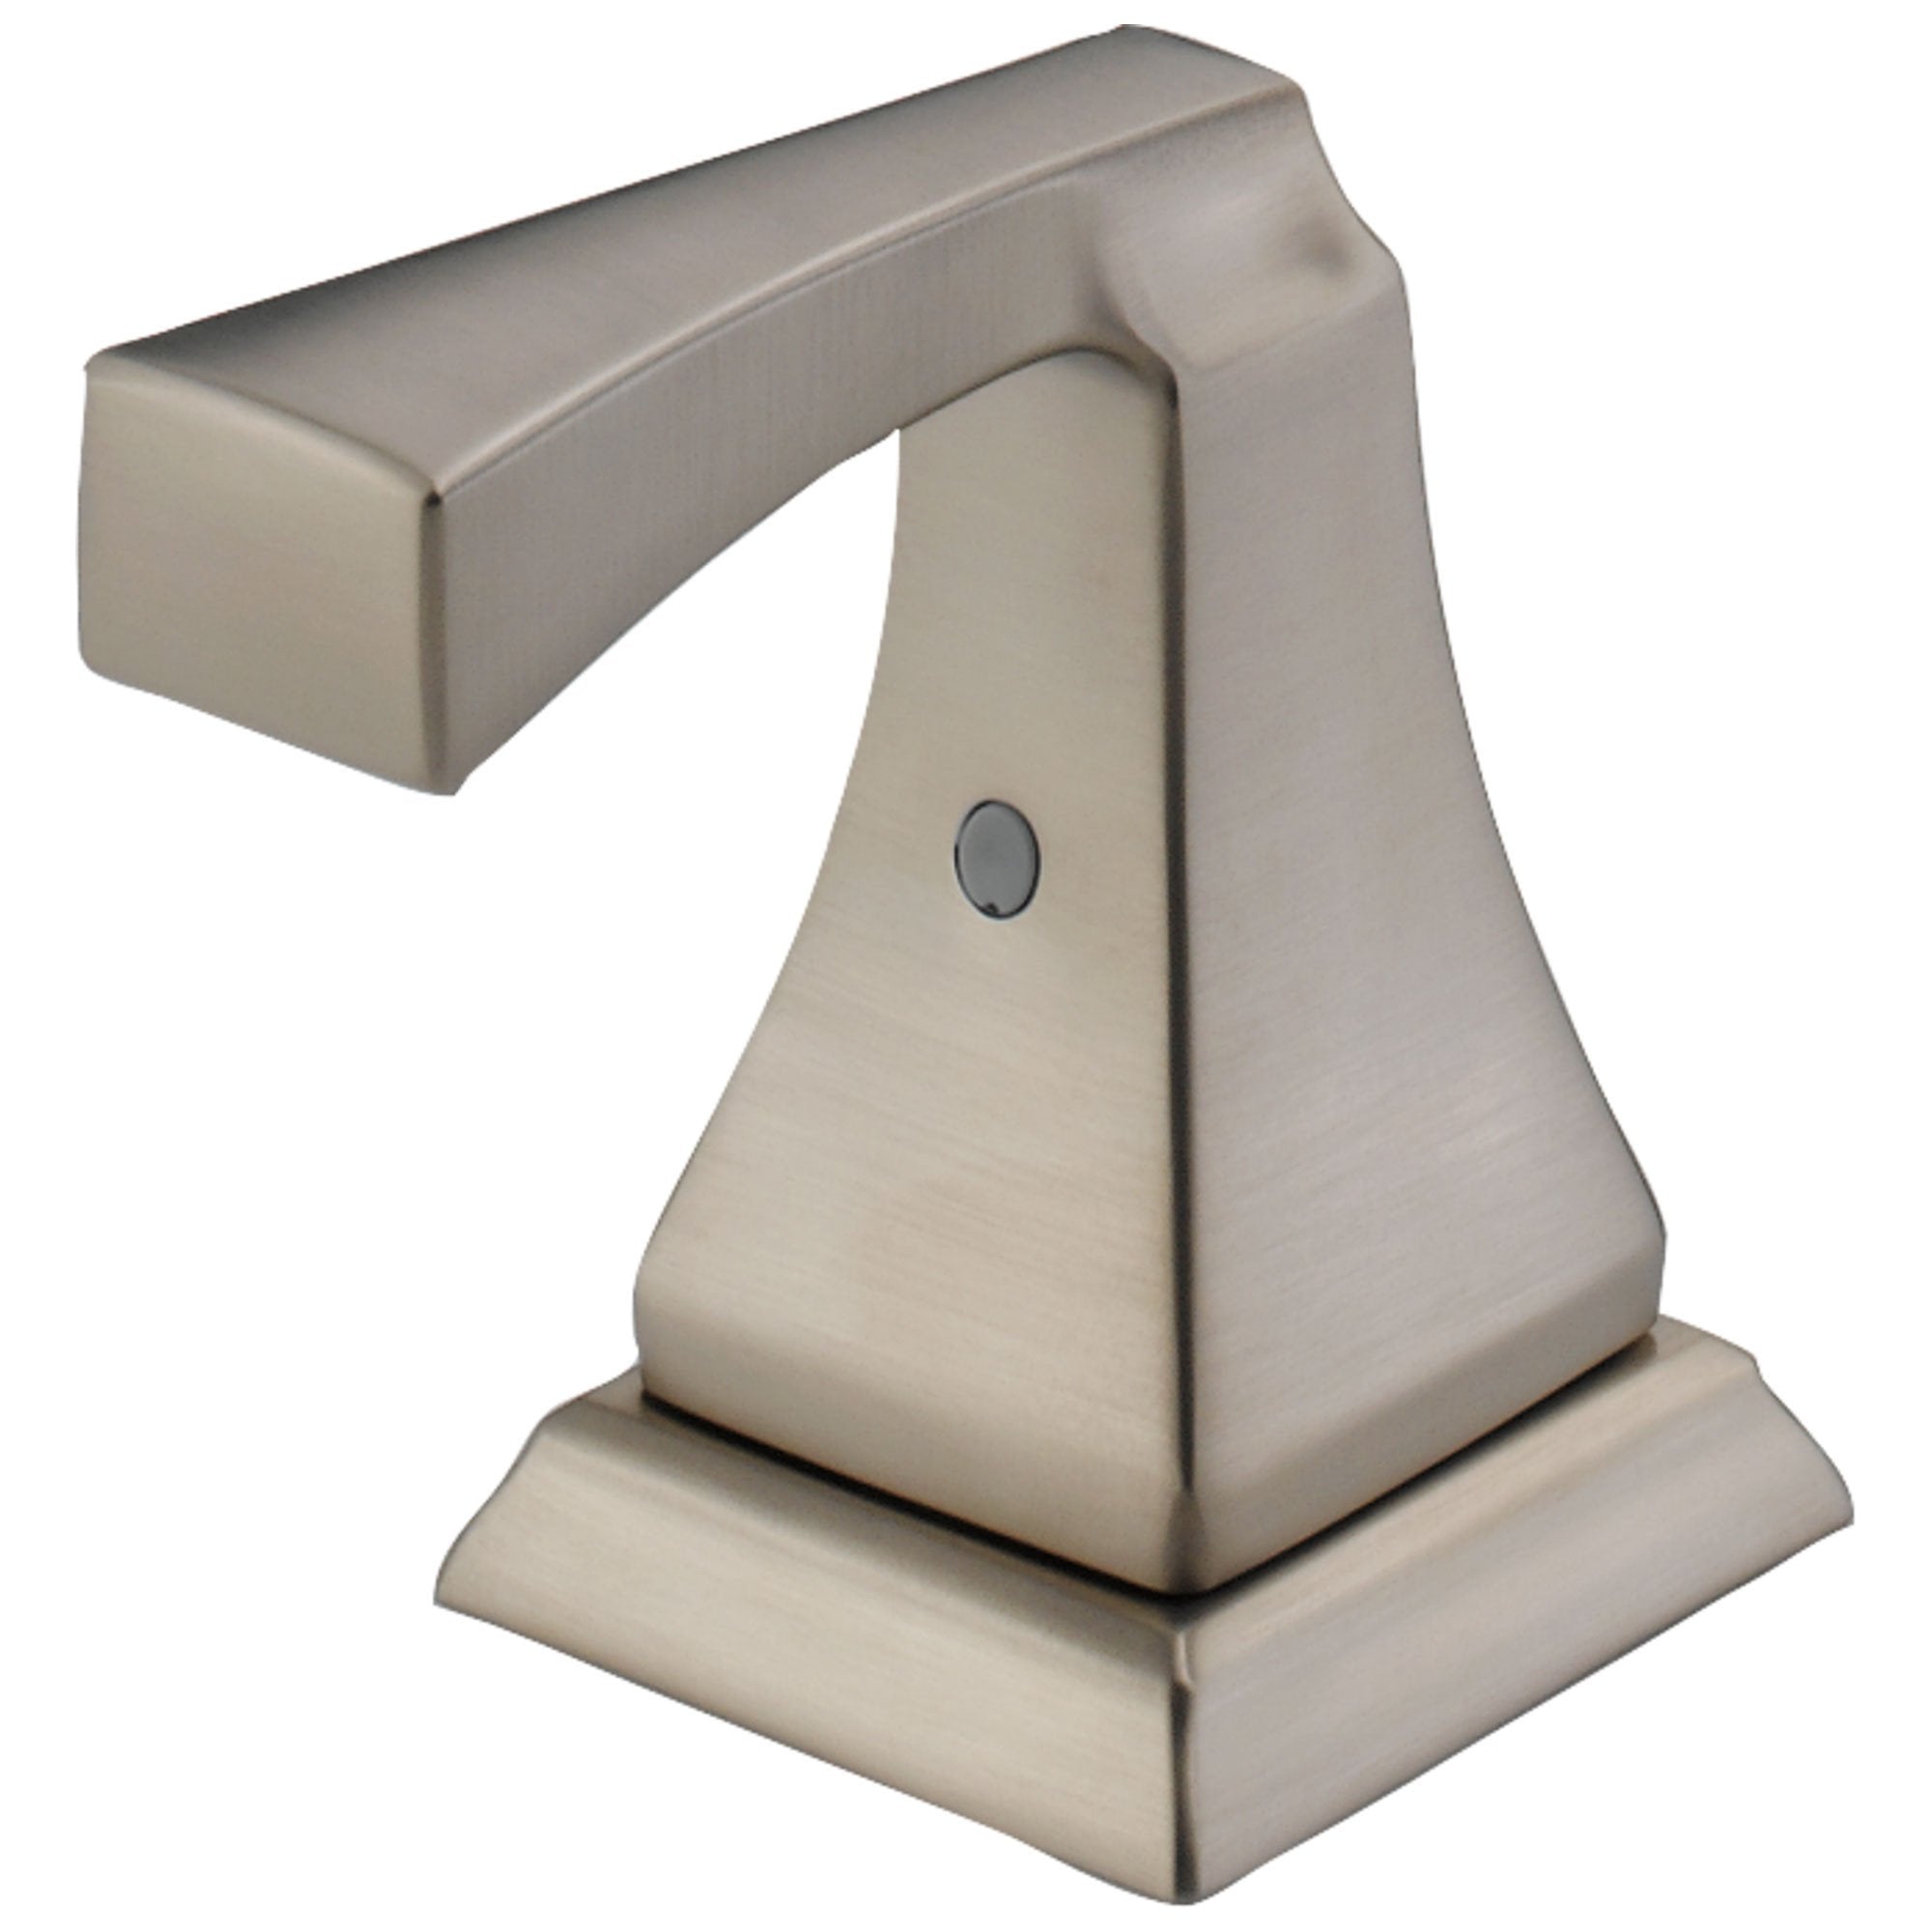 Delta Dryden Collection Stainless Steel Finish Lavatory Metal Lever Handles - Quantity 2 Included DH251SS